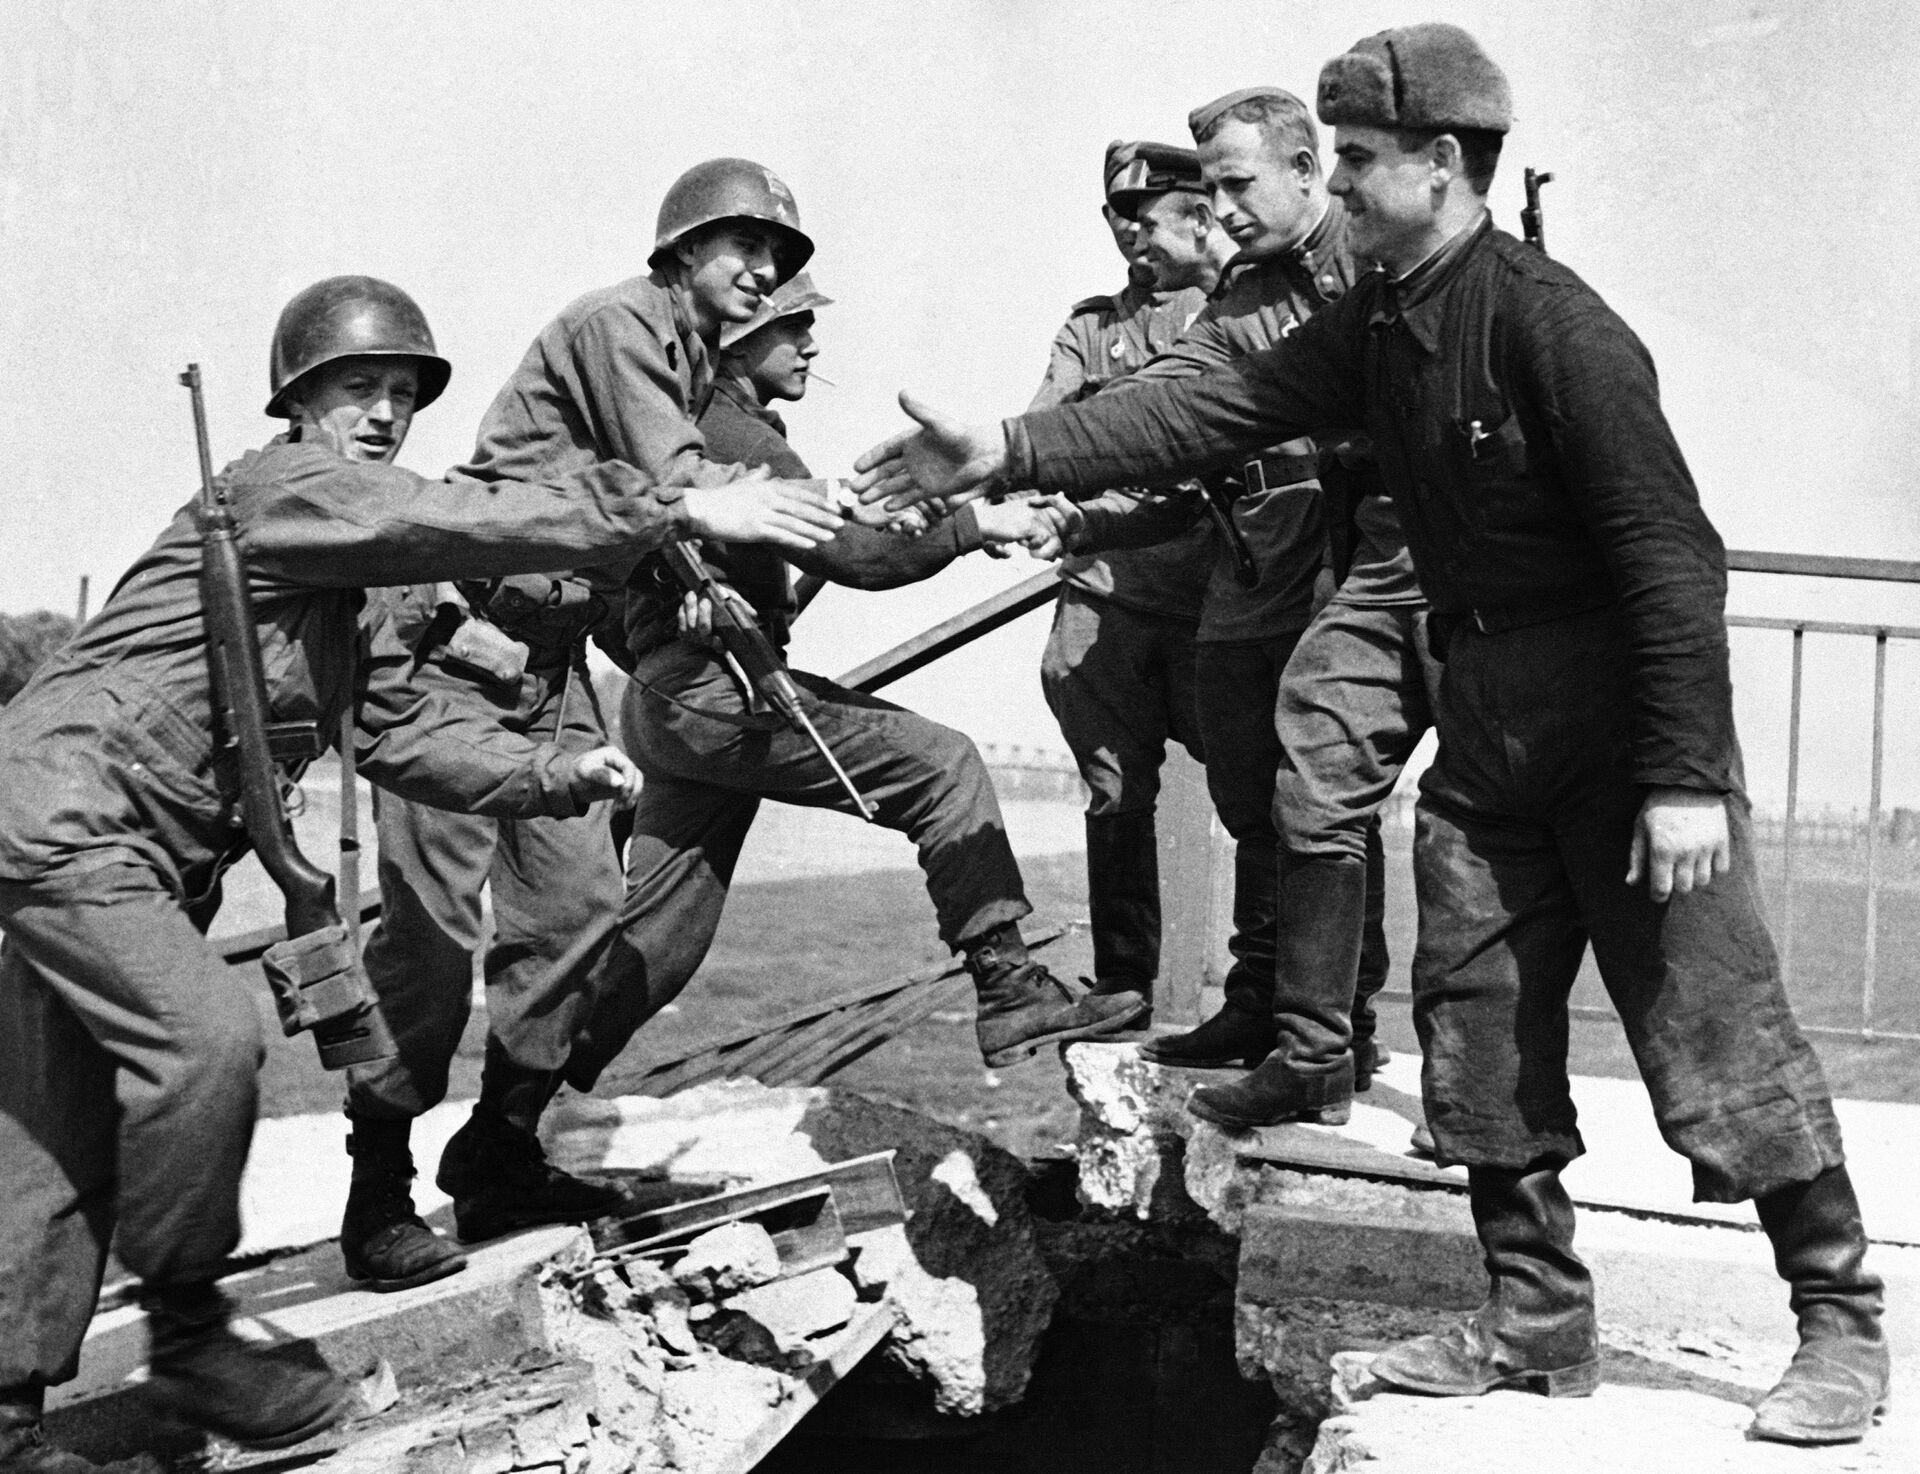 US and Soviet troops shaking hands after meeting up at Torgau on the Elbe river in Germany on 26 April 1945 - Sputnik International, 1920, 10.05.2022